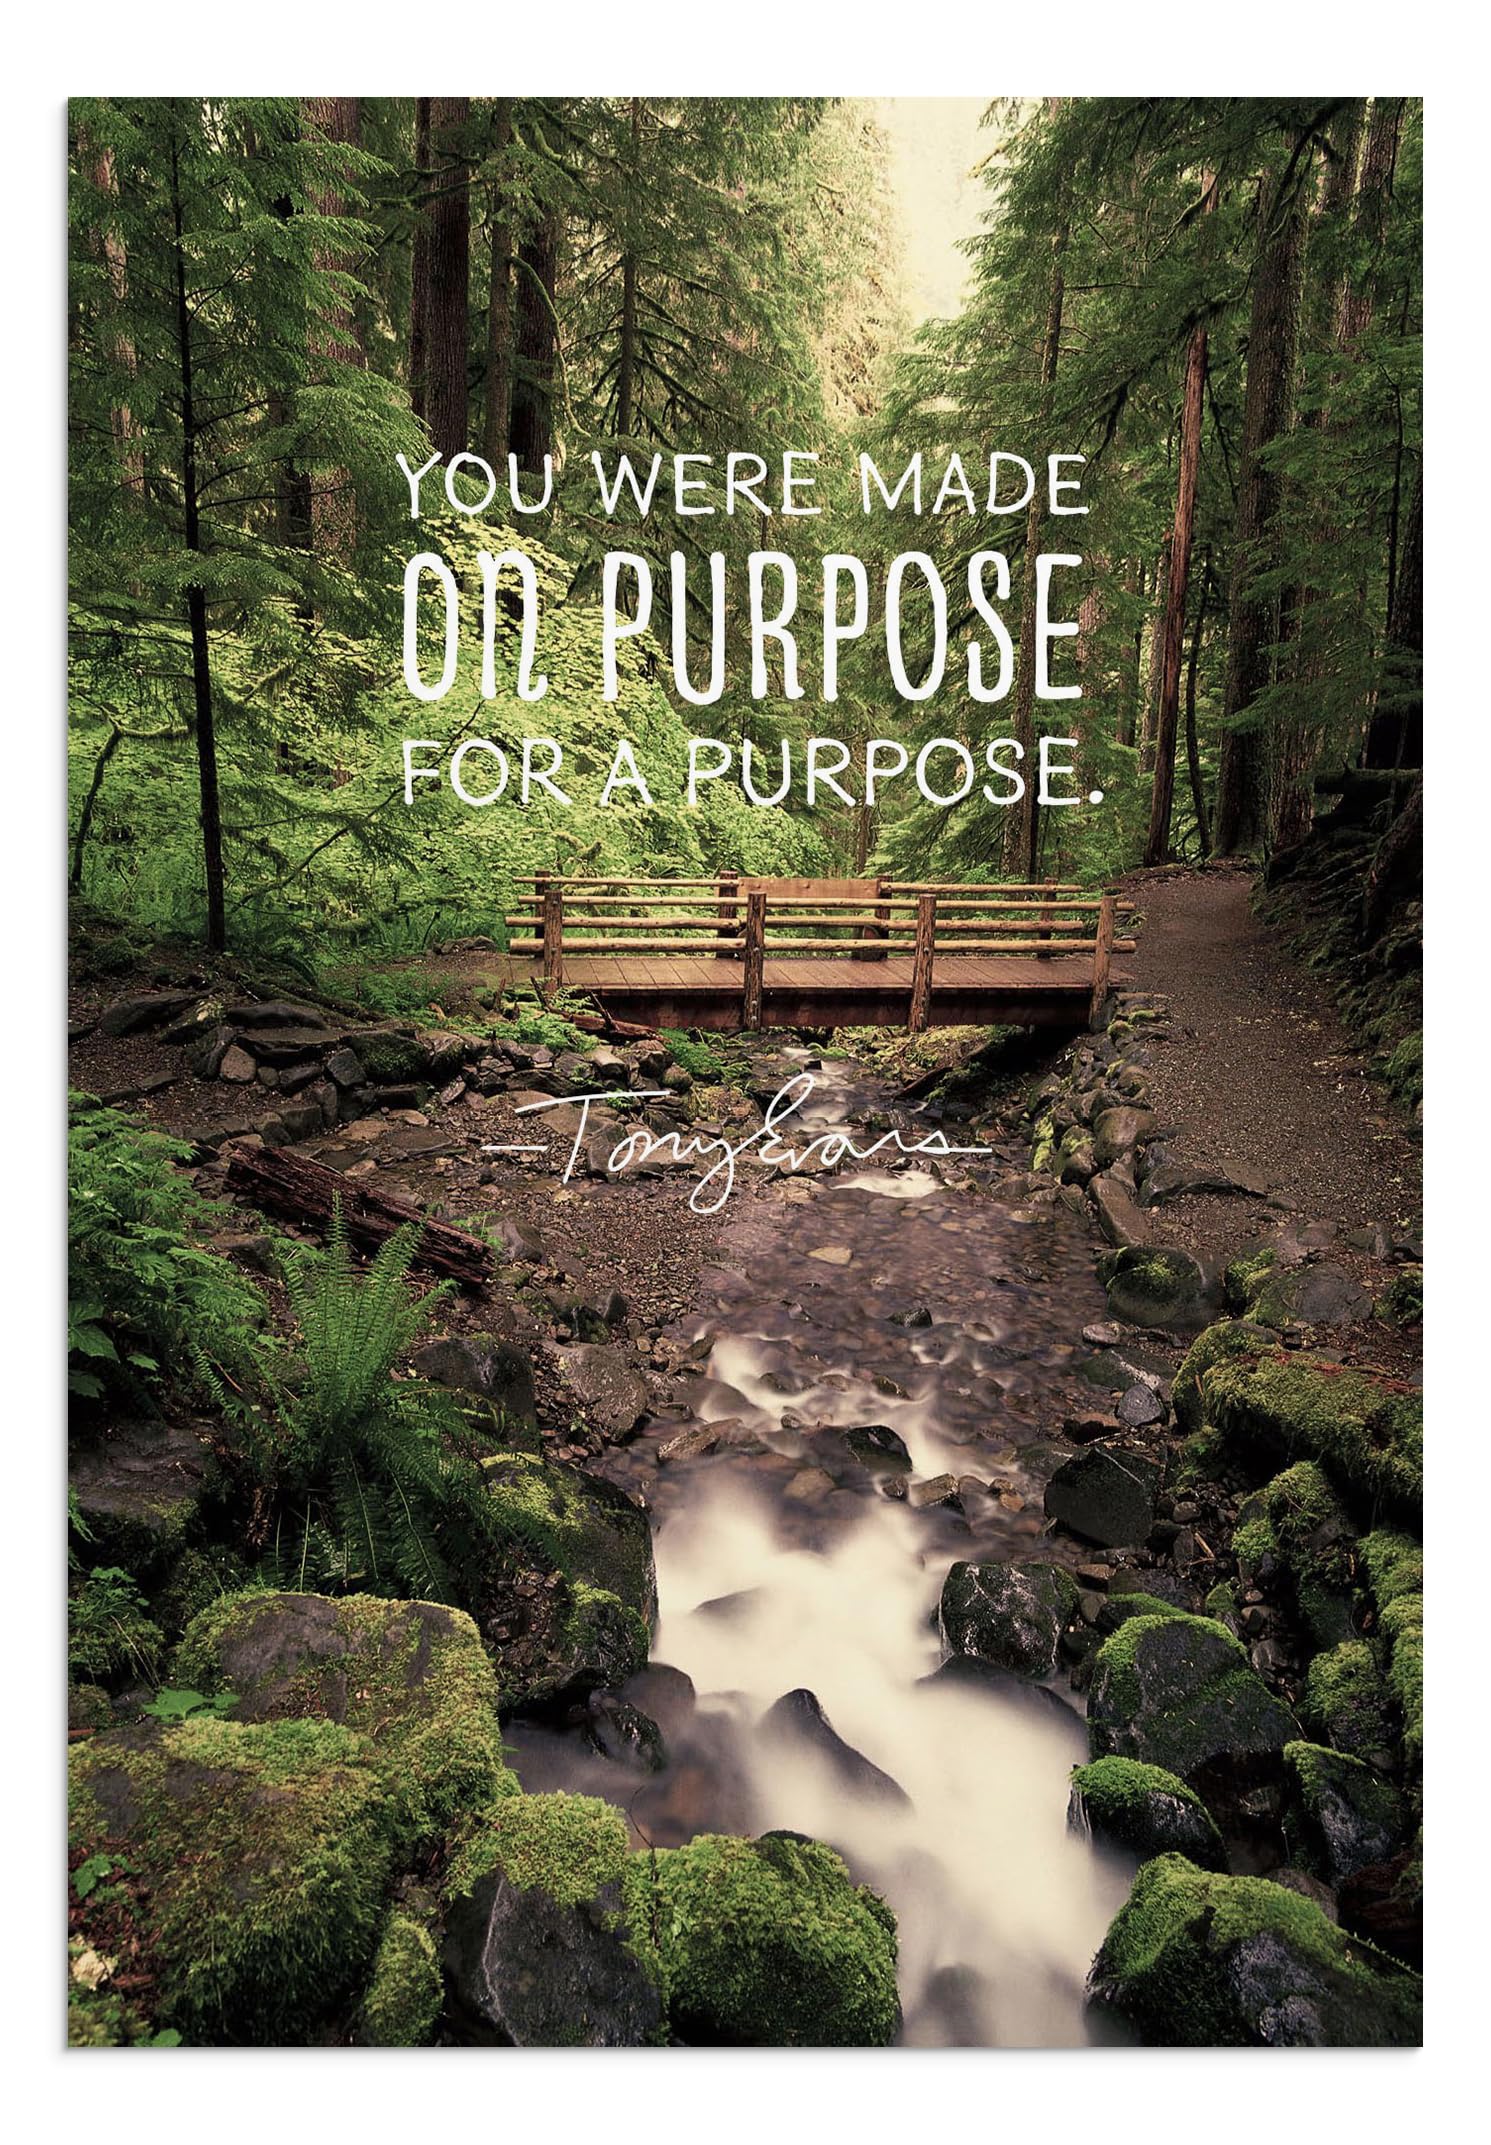 DaySpring - Tony Evans - You Were Made for a Purpose - 4 Design Assortment with Scripture - 12 Birthday Boxed Cards & Envelopes (18562)